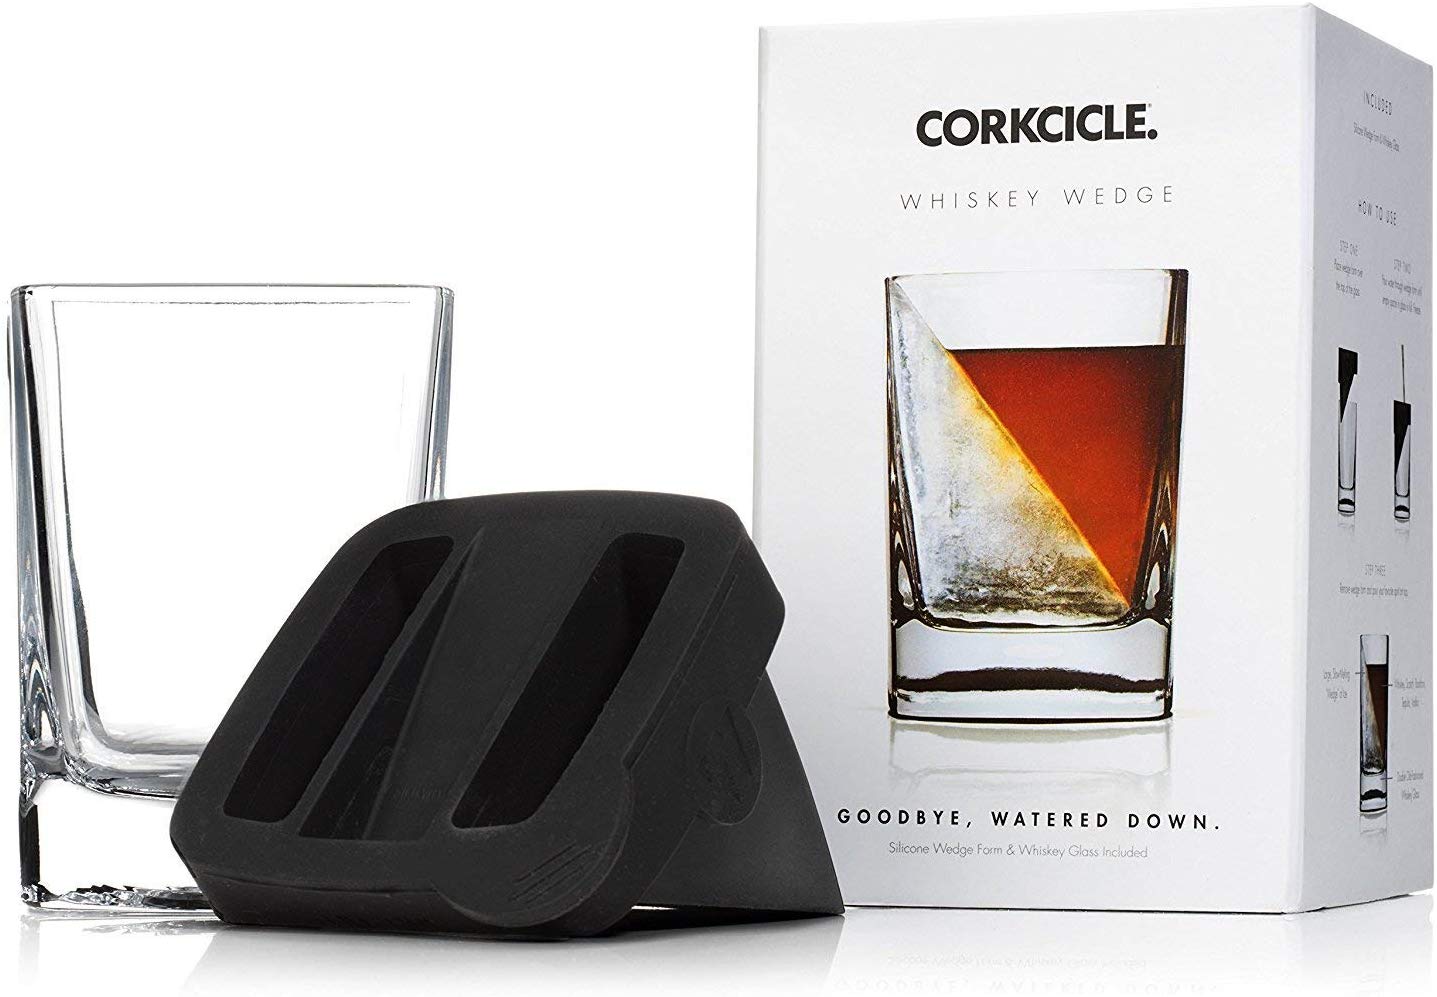 Best Whiskey Gifts 2022: Corkcicle Whiskey Wedge 2022